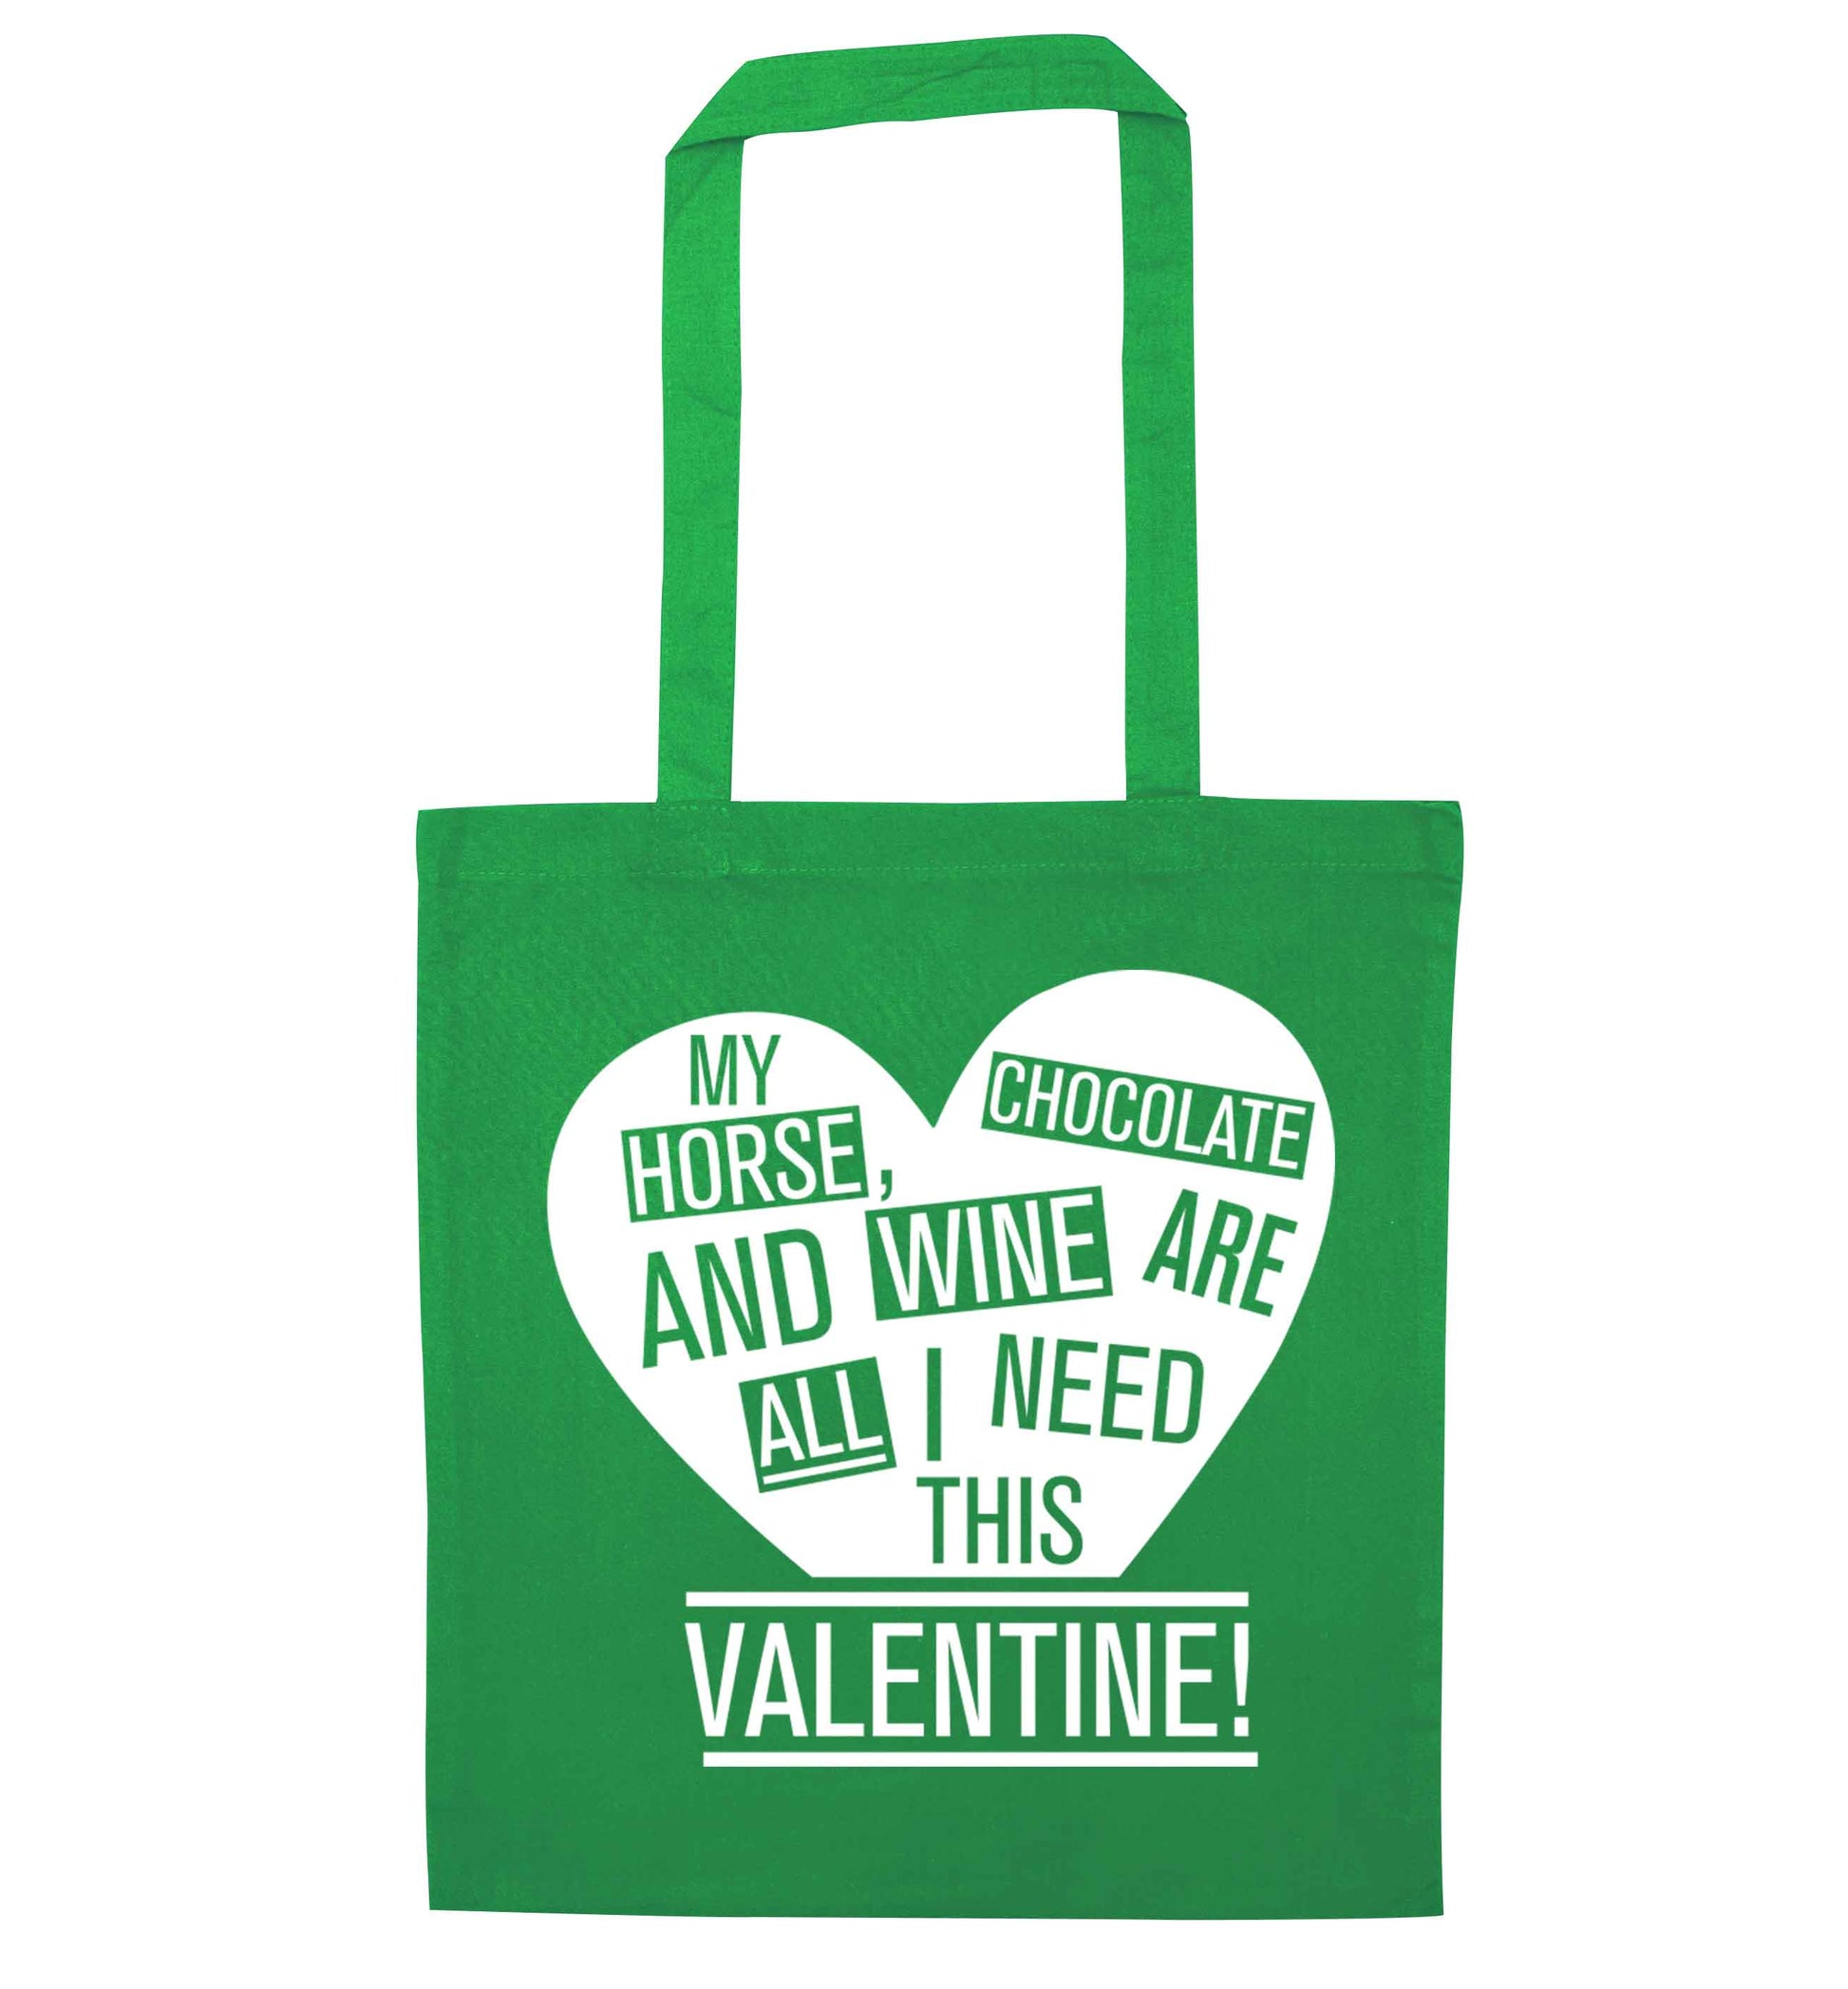 My horse chocolate and wine are all I need this valentine green tote bag